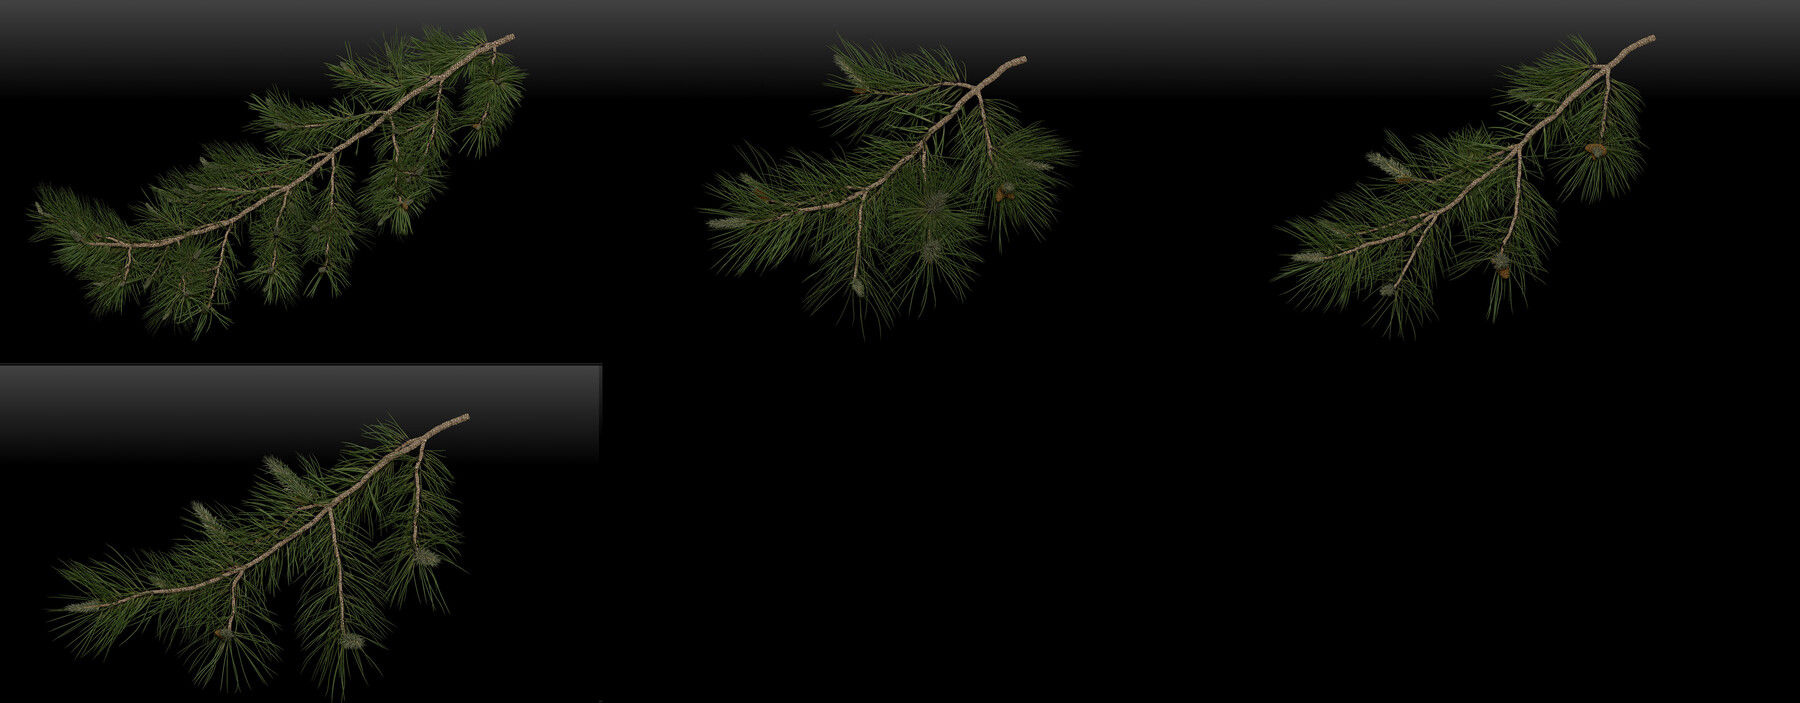 274,826 Pine Branches Sky Images, Stock Photos, 3D objects, & Vectors